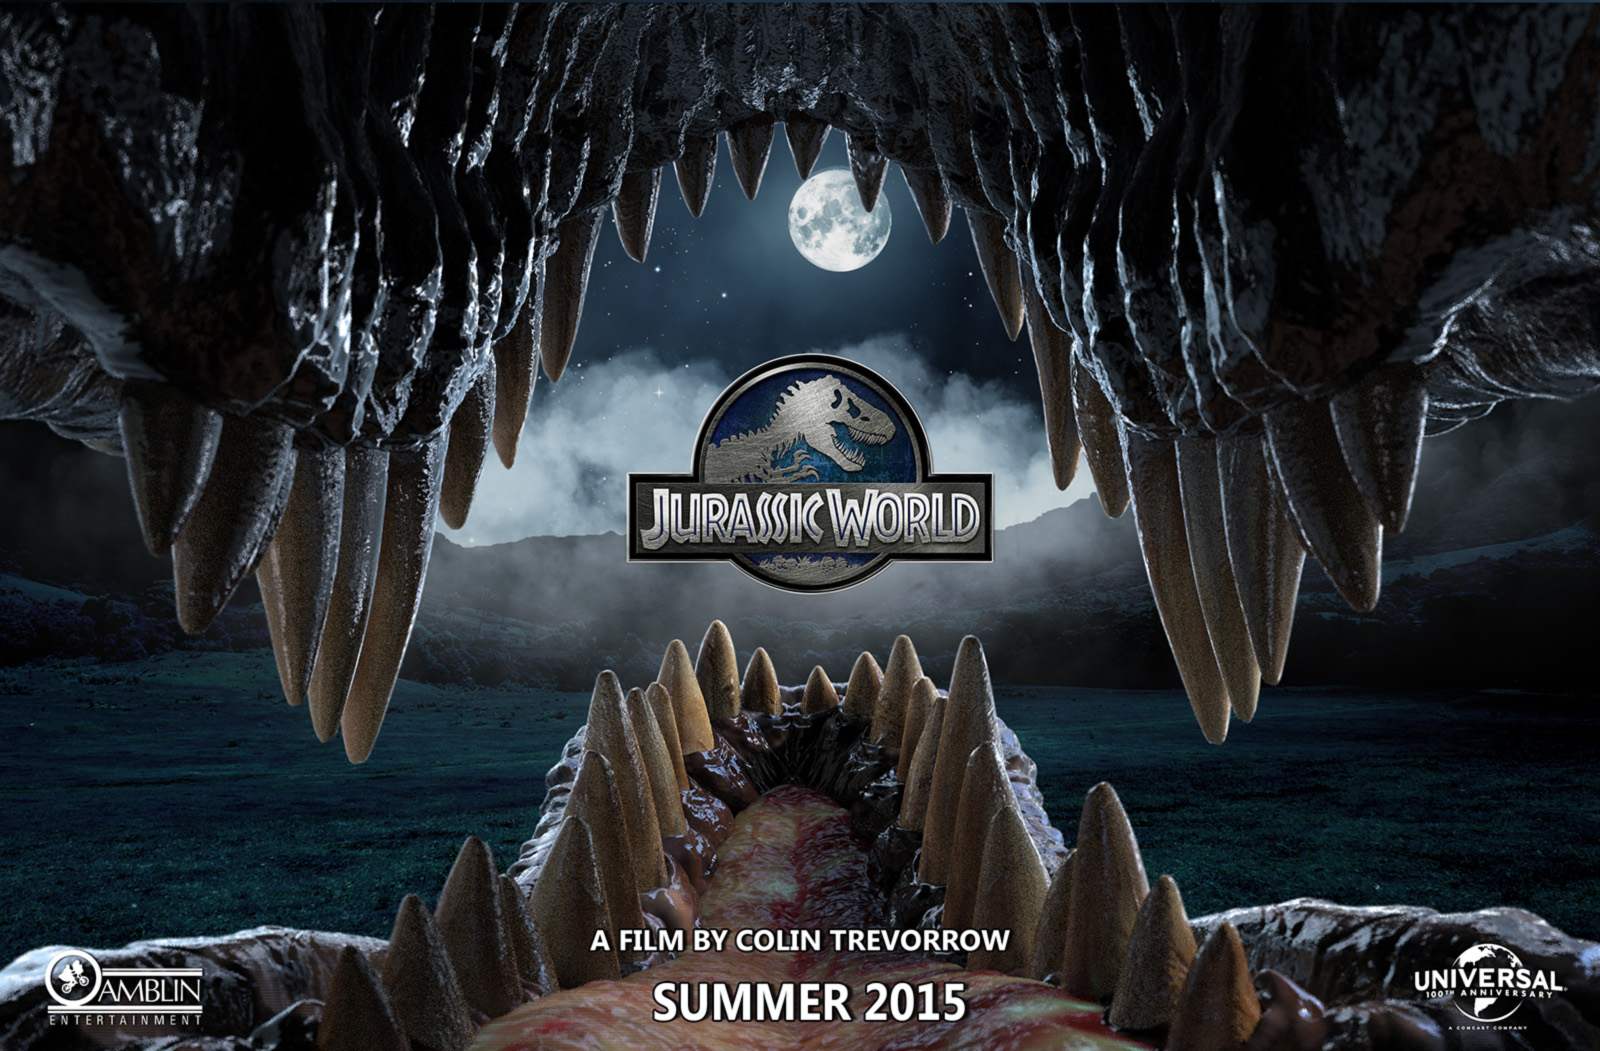 Geek insider, geekinsider, geekinsider. Com,, 'jurassic world' brochure reveals details from the film, entertainment